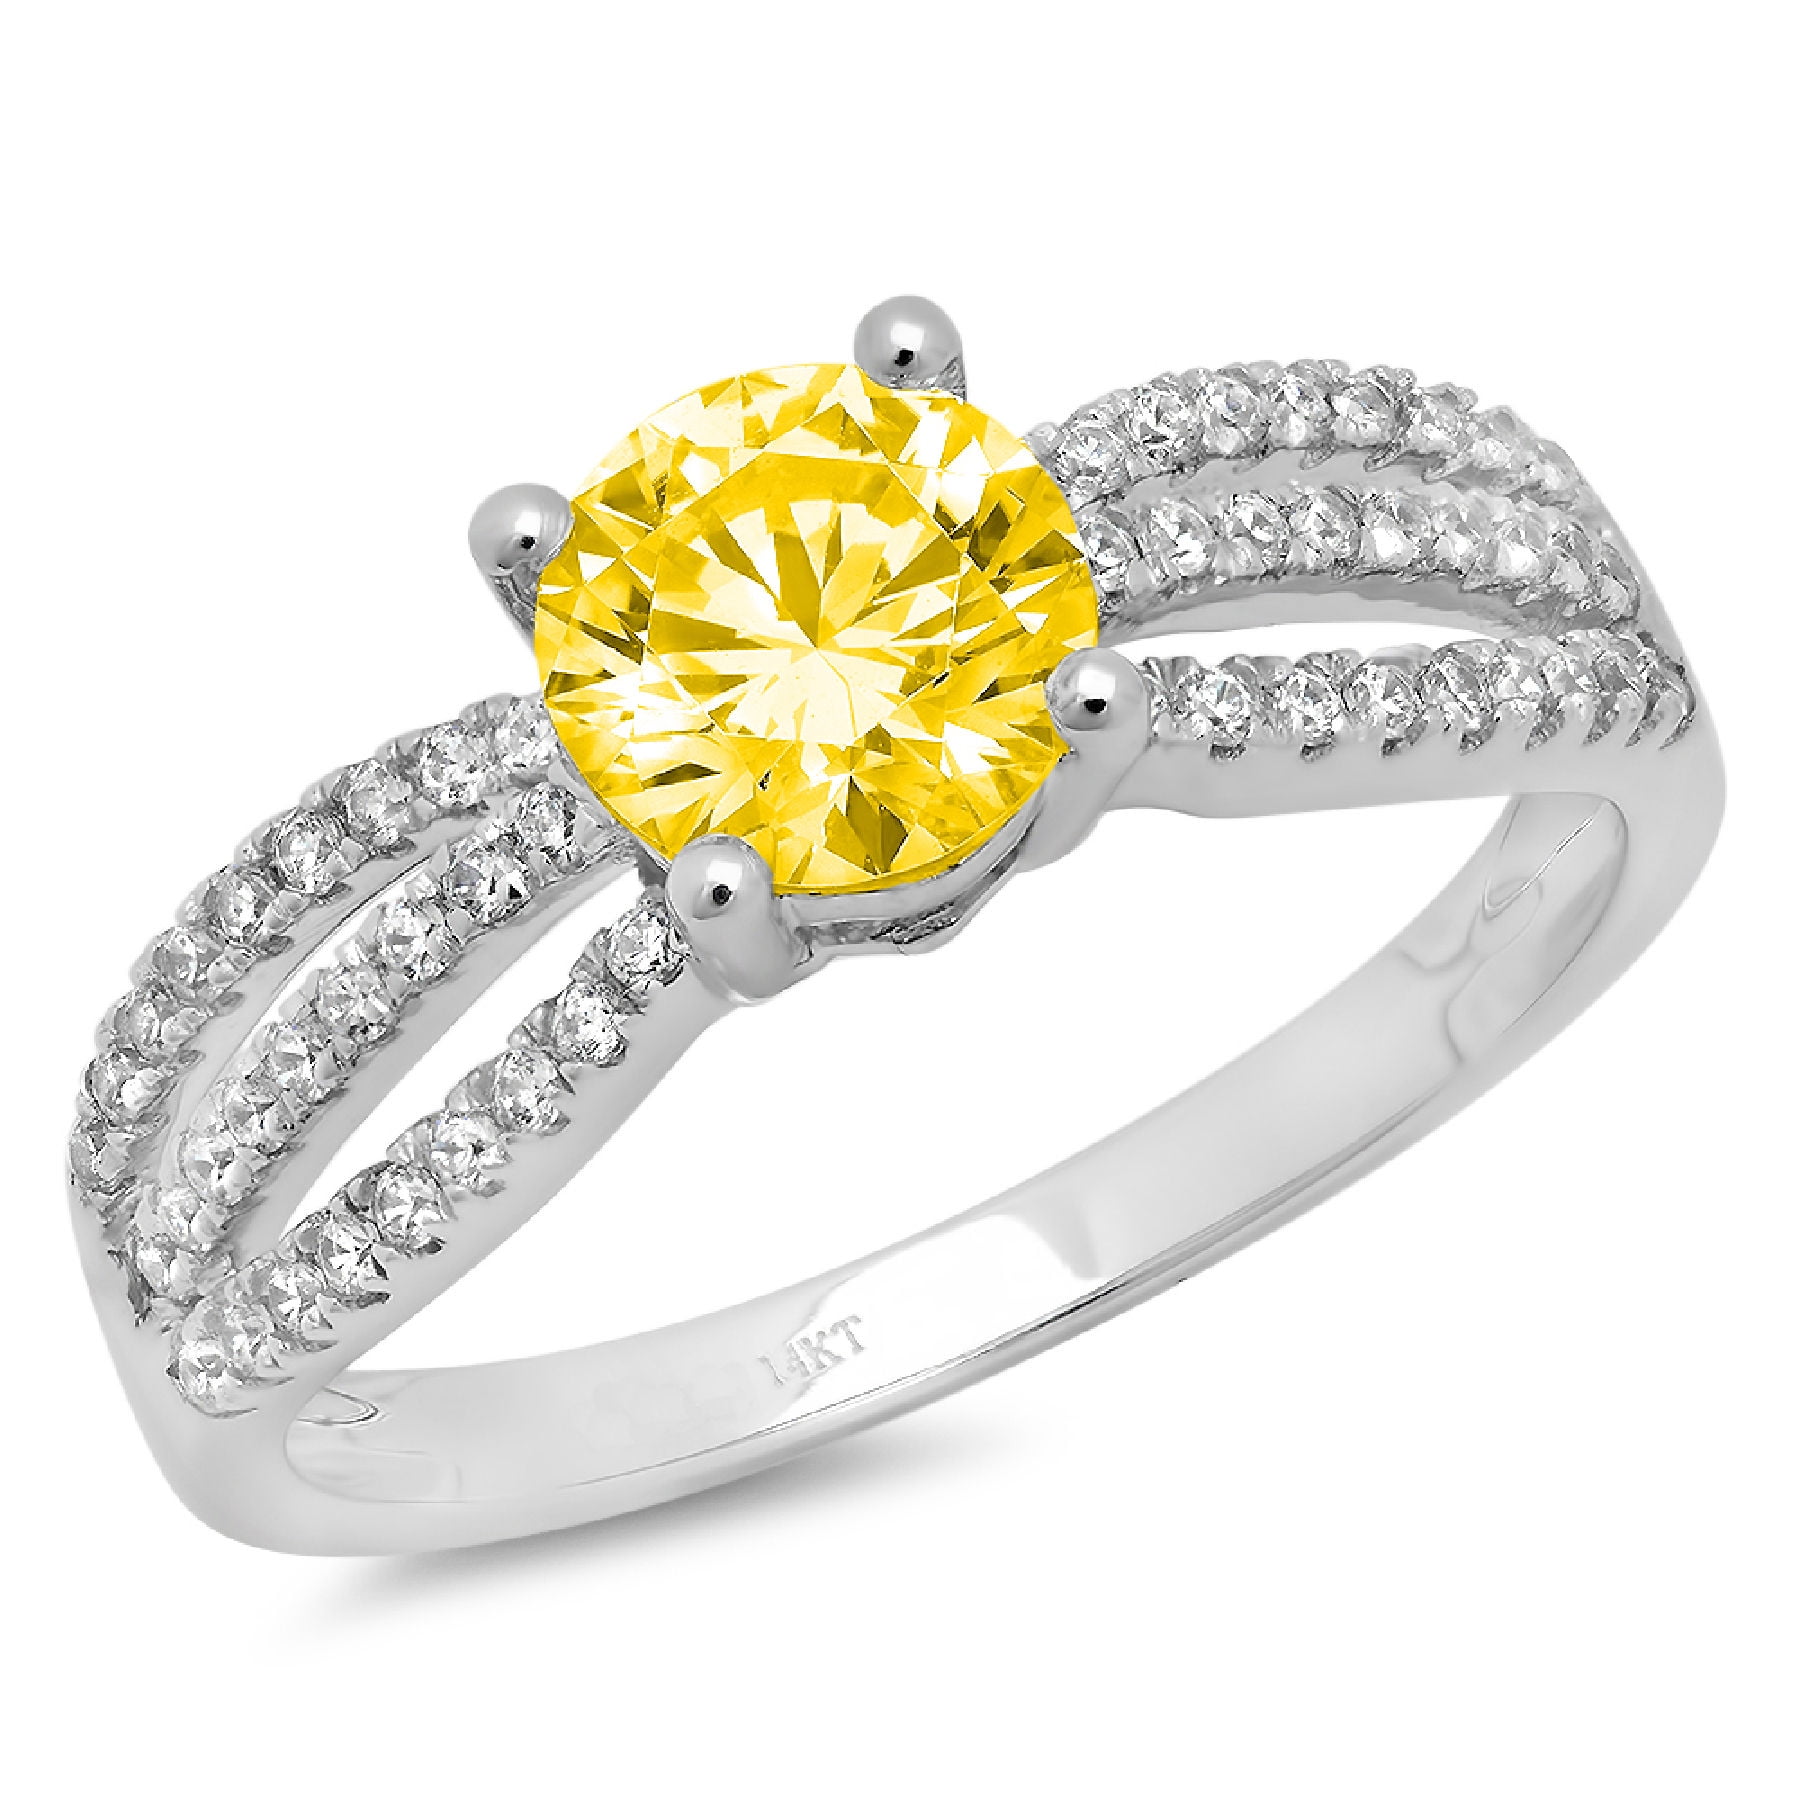 3.0 ct Round Cut Canary Yellow Simulated Diamond Classic Wedding Engagement Bridal Promise Designer Ring Solid 14k Rose Gold